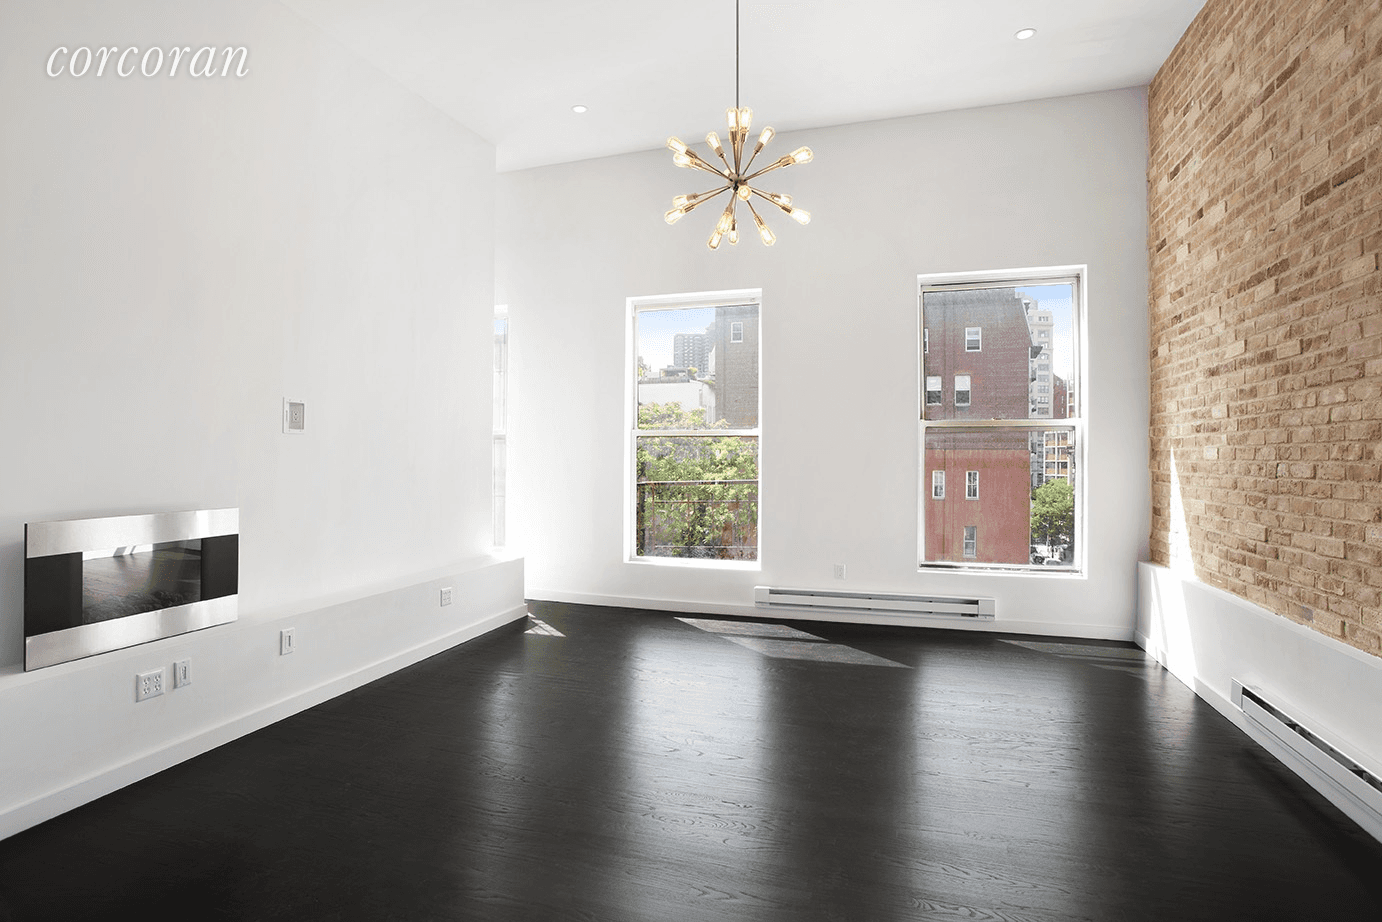 Beautifully restored and GUT RENOVATED Prime TriBeCa loft with huge western facing living room windows.